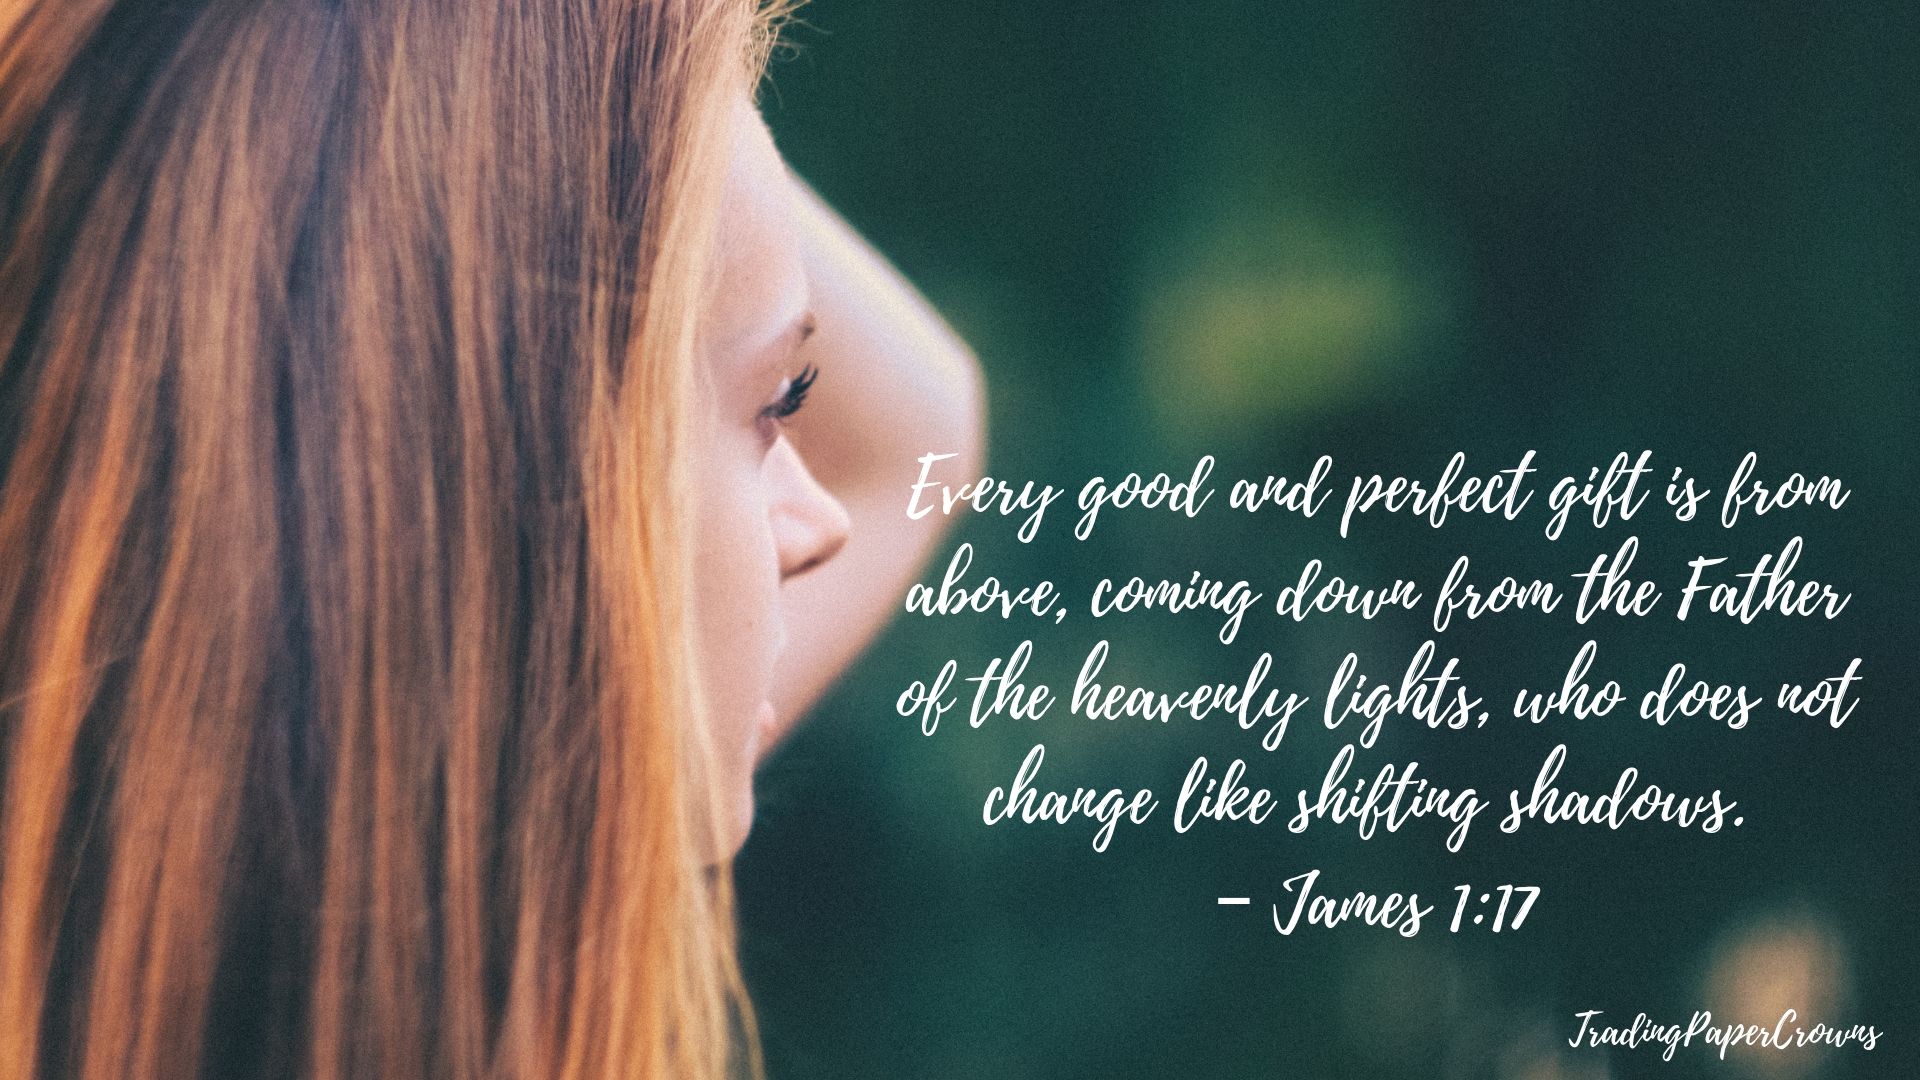 Every good and perfect gift is from above, coming down from the Father of the heavenly lights, who does not change like shifting shadows. – James 1_17.jpg